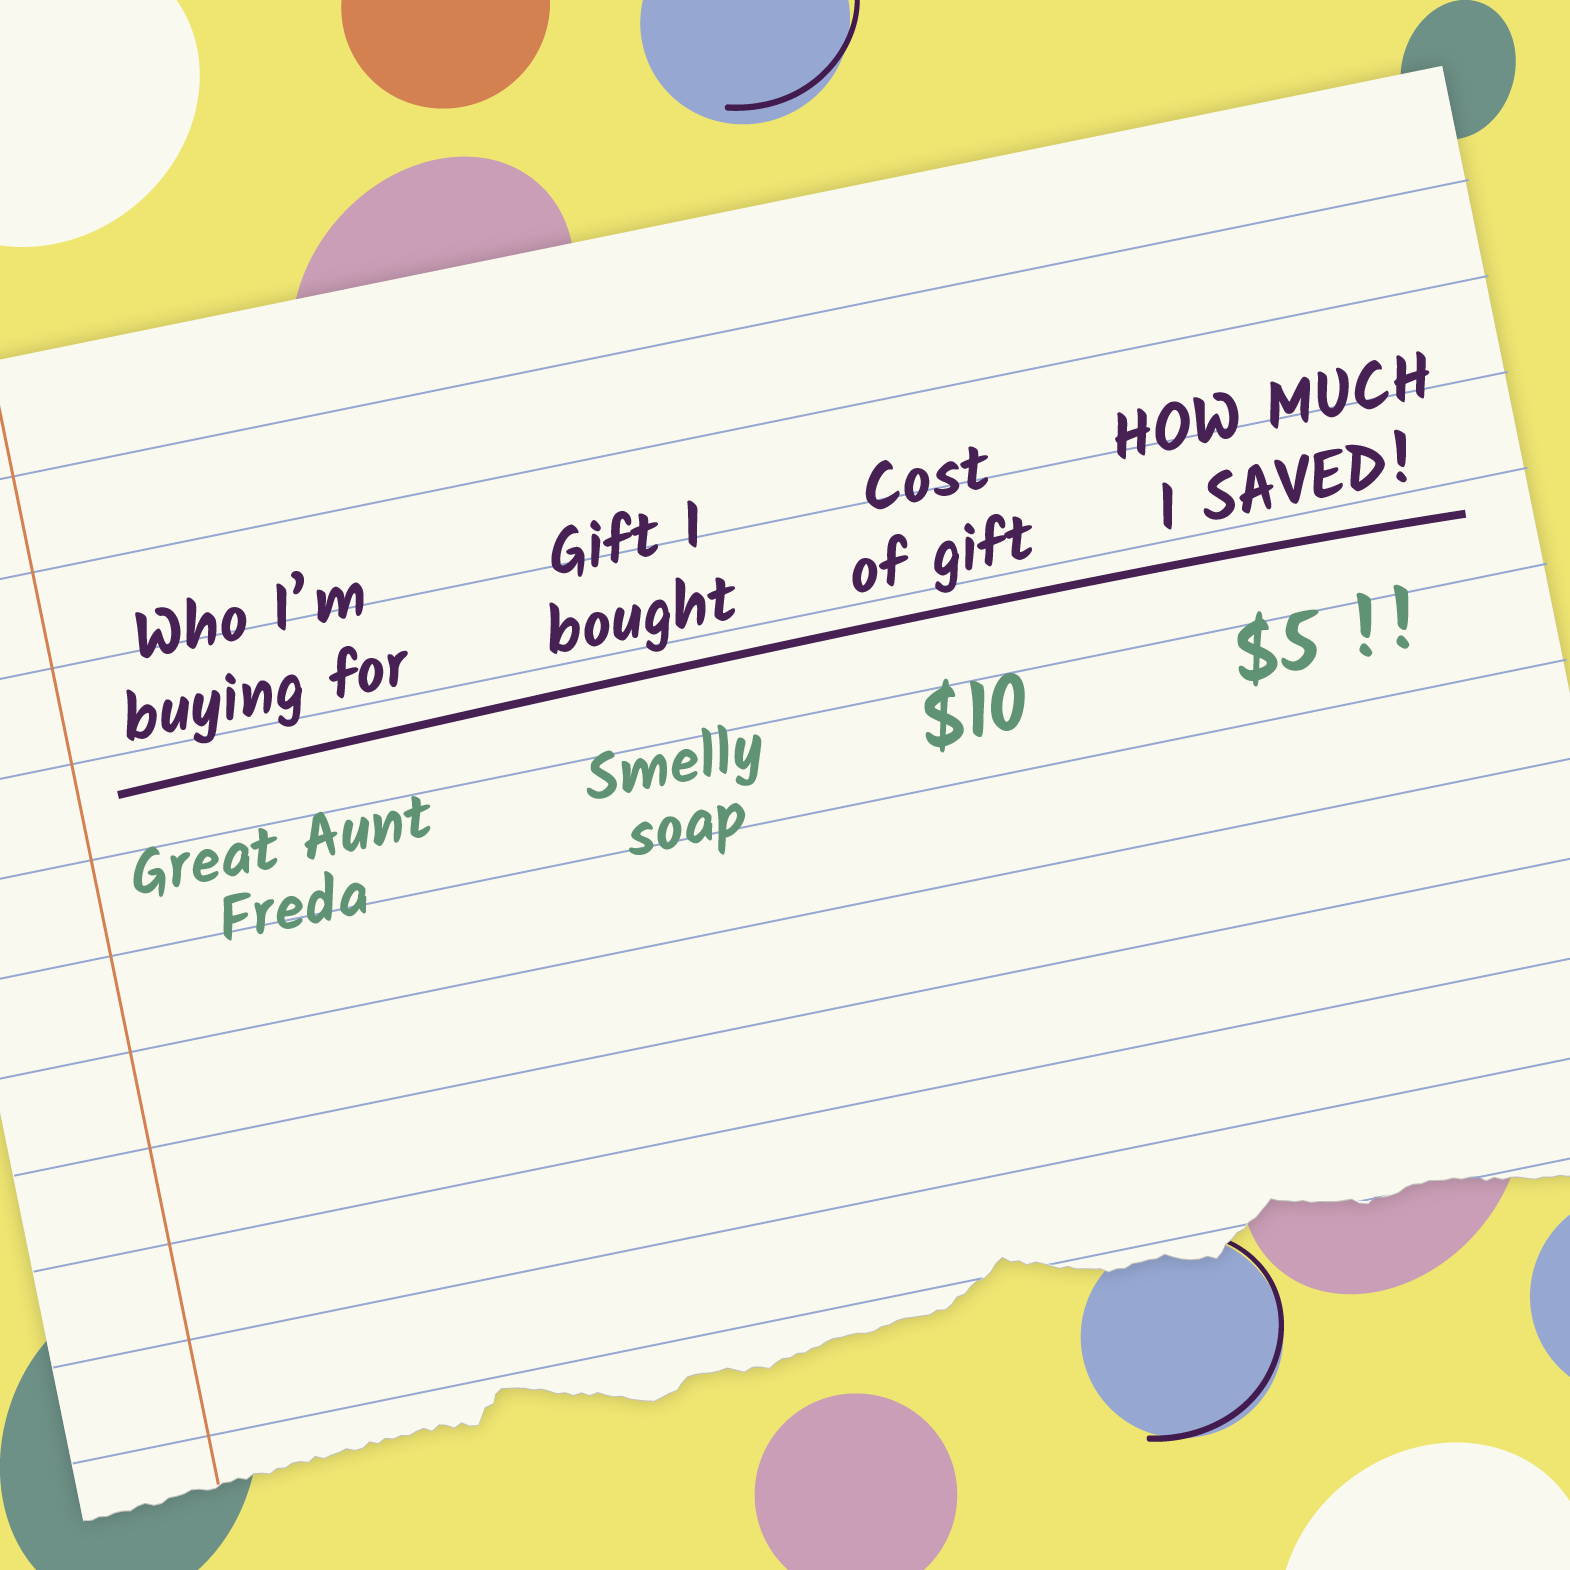 A list for Christmas gift shopping with person to buy for, the gift, how much the gift cost, and how much money was saved